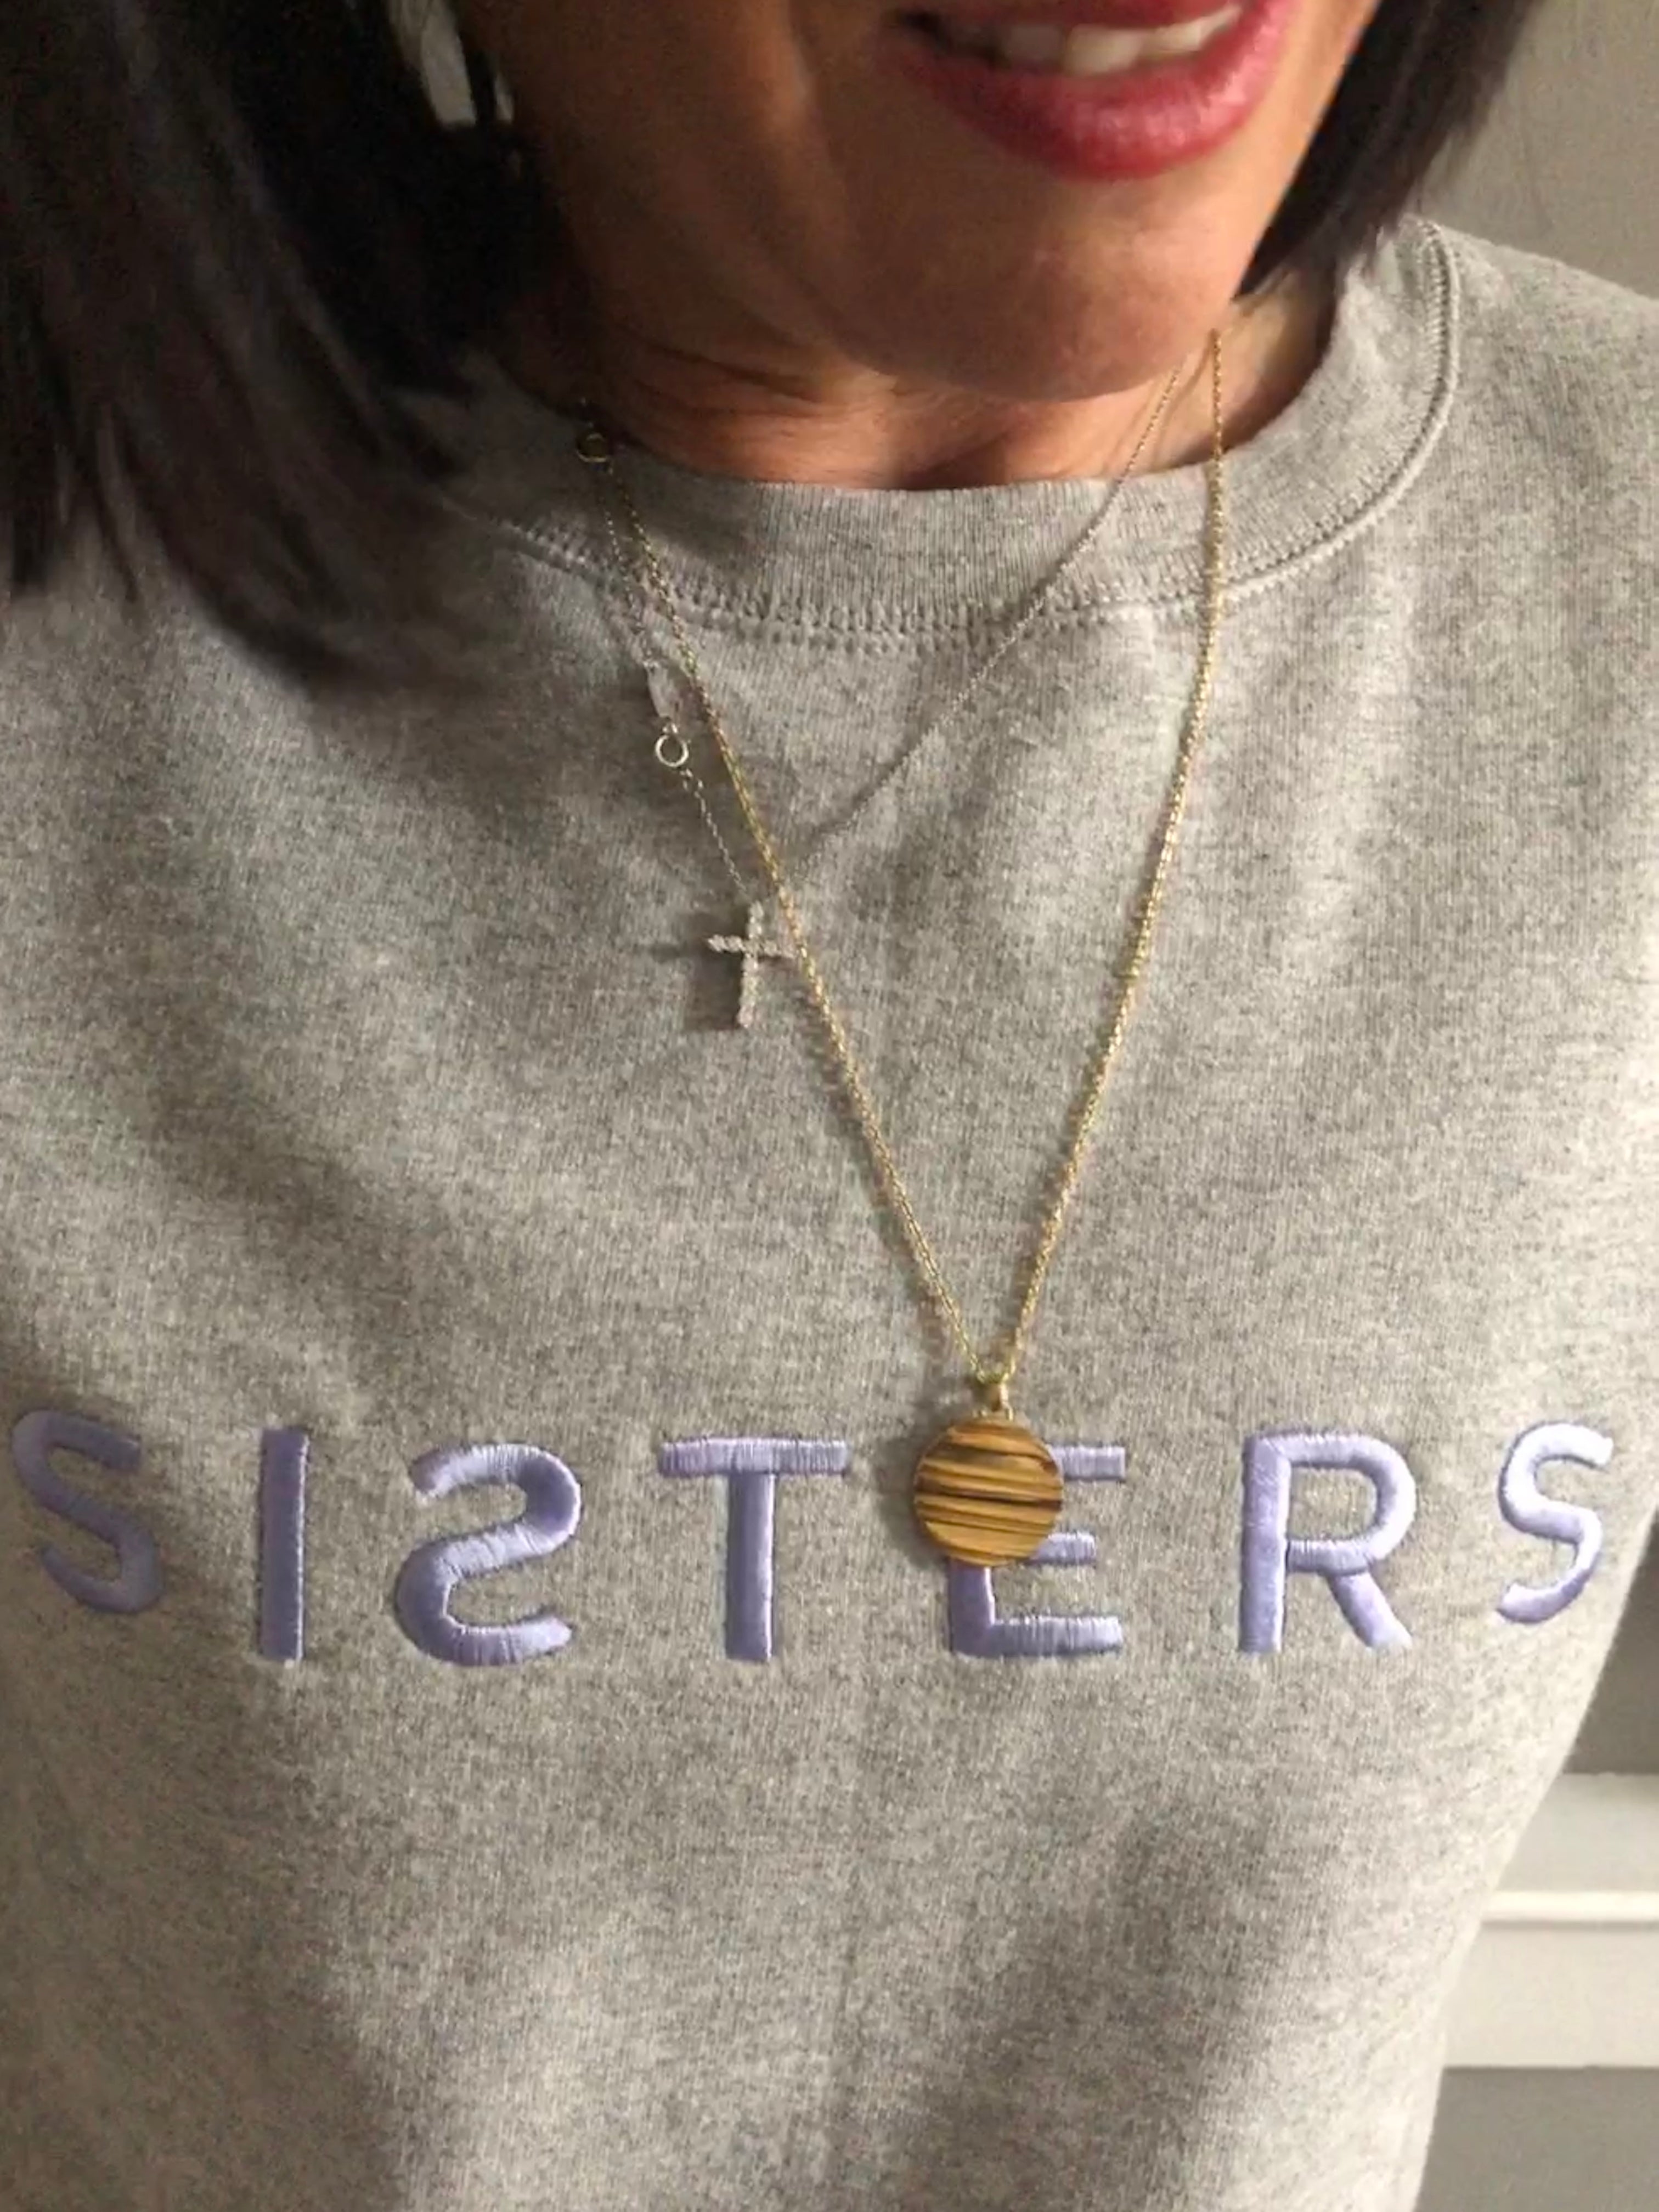 SISTERS embroidered sweatshirt SMALL